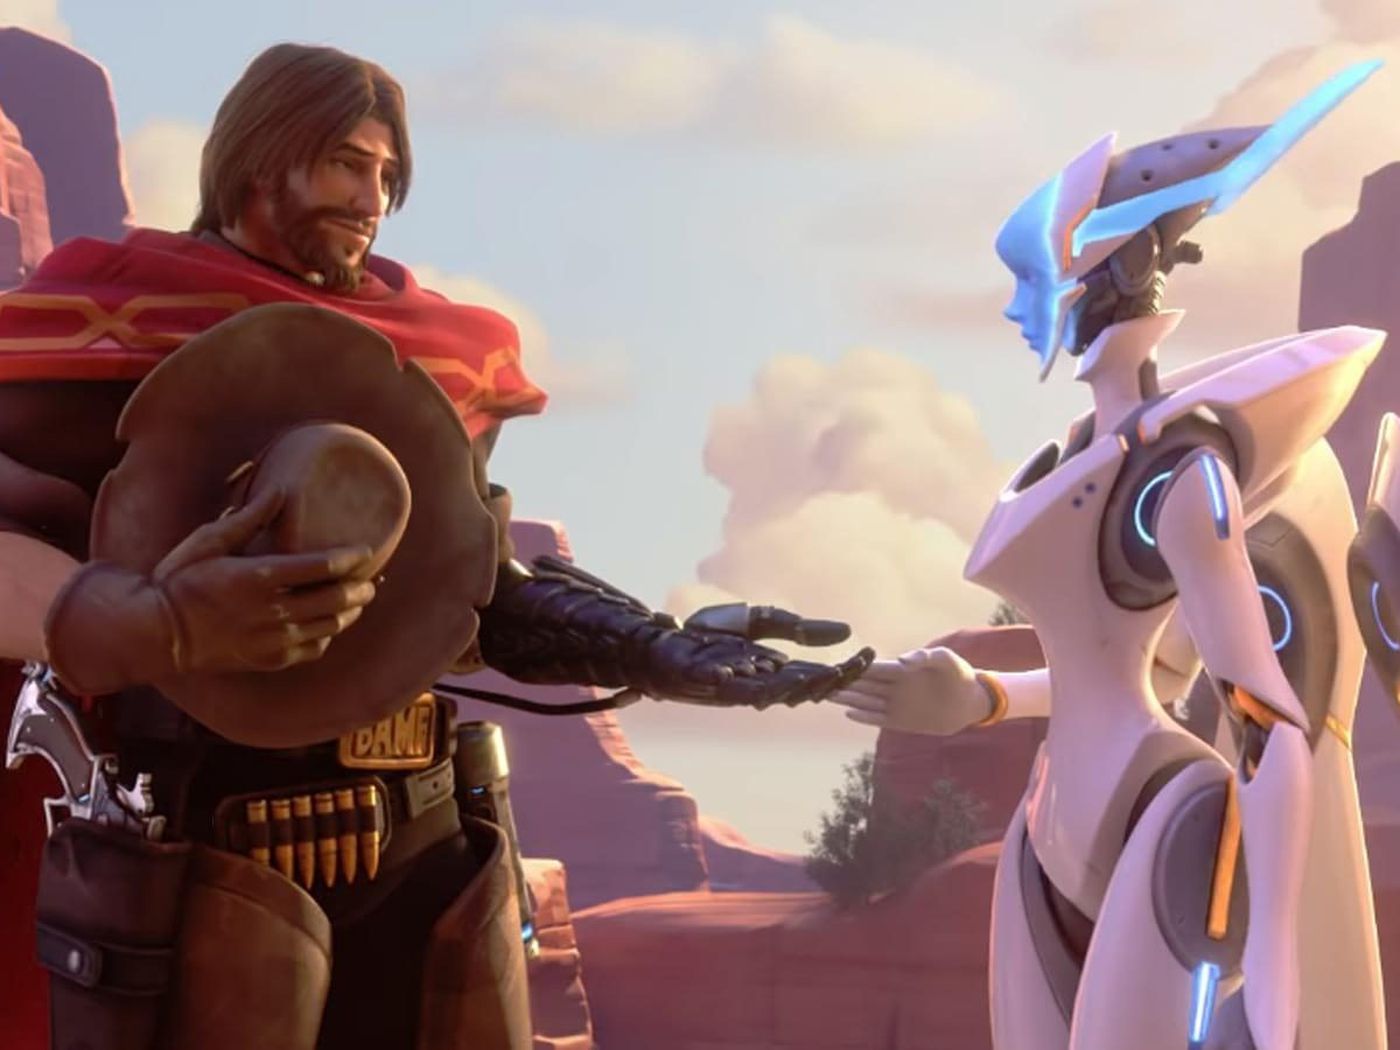 Overwatch's McCree has a new name: Cole Cassidy